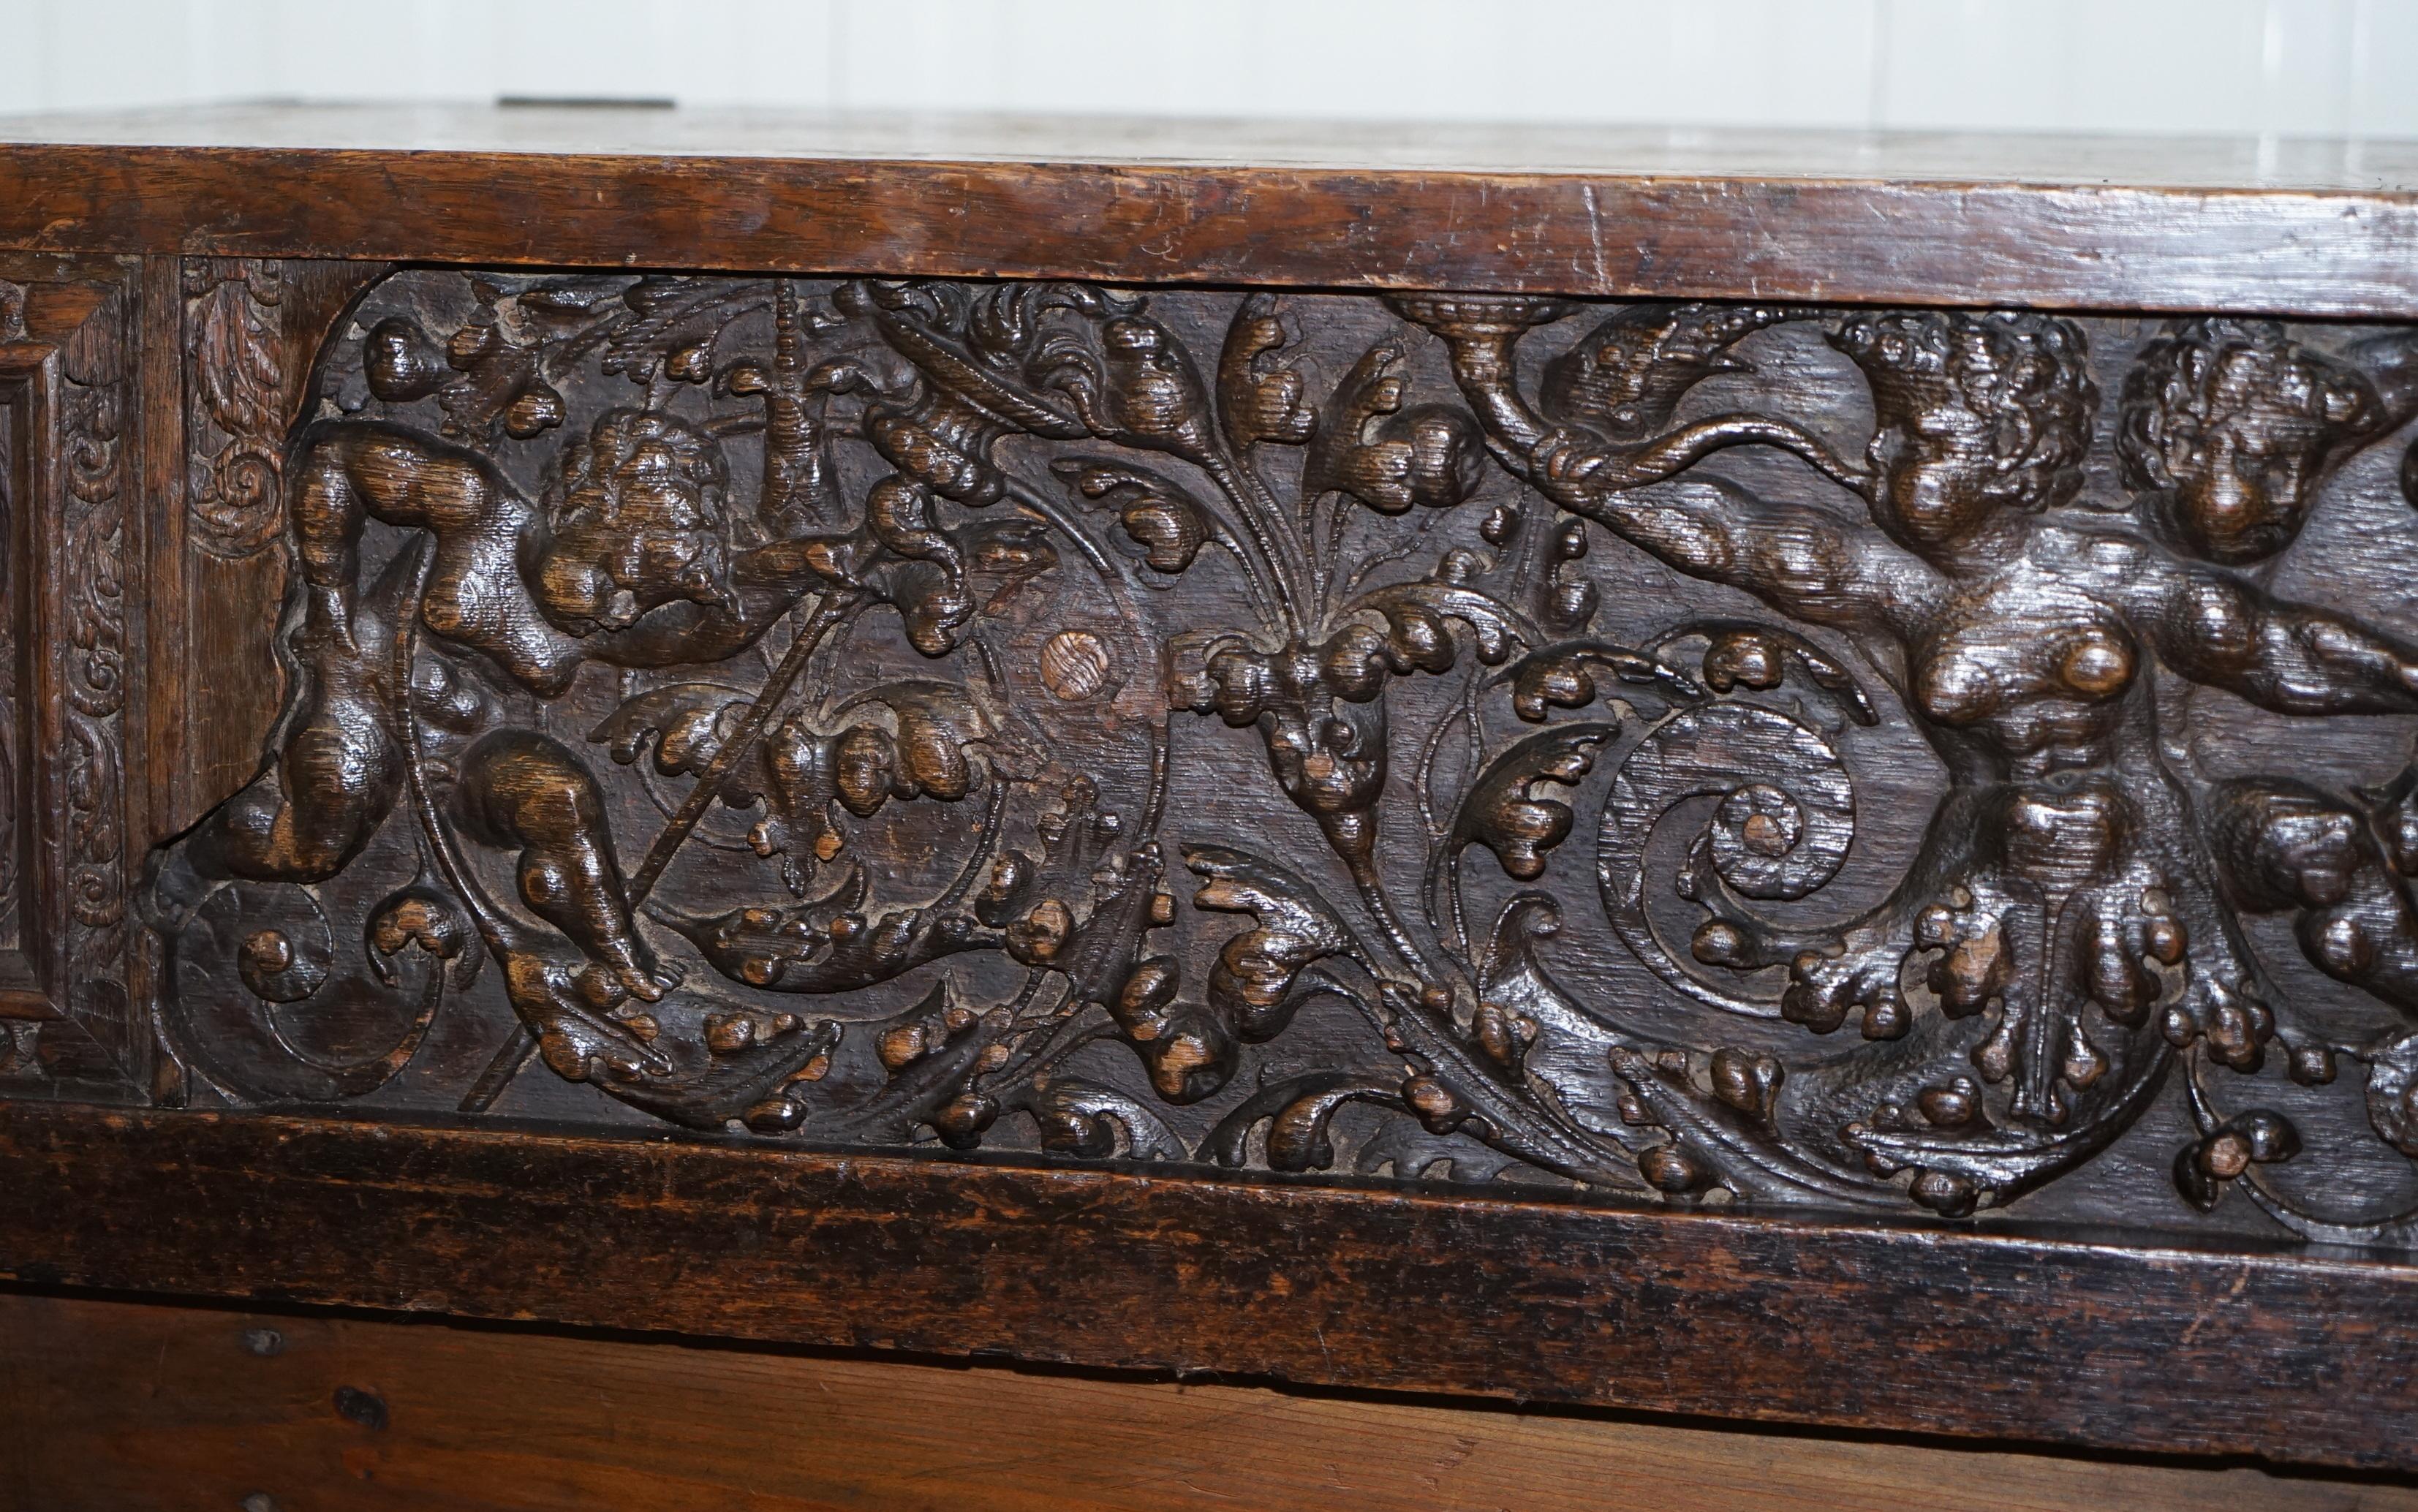 Very Rare circa 1720 Trunk Chest Coffer on Stand Sideboard Carved Cherub Figures For Sale 3